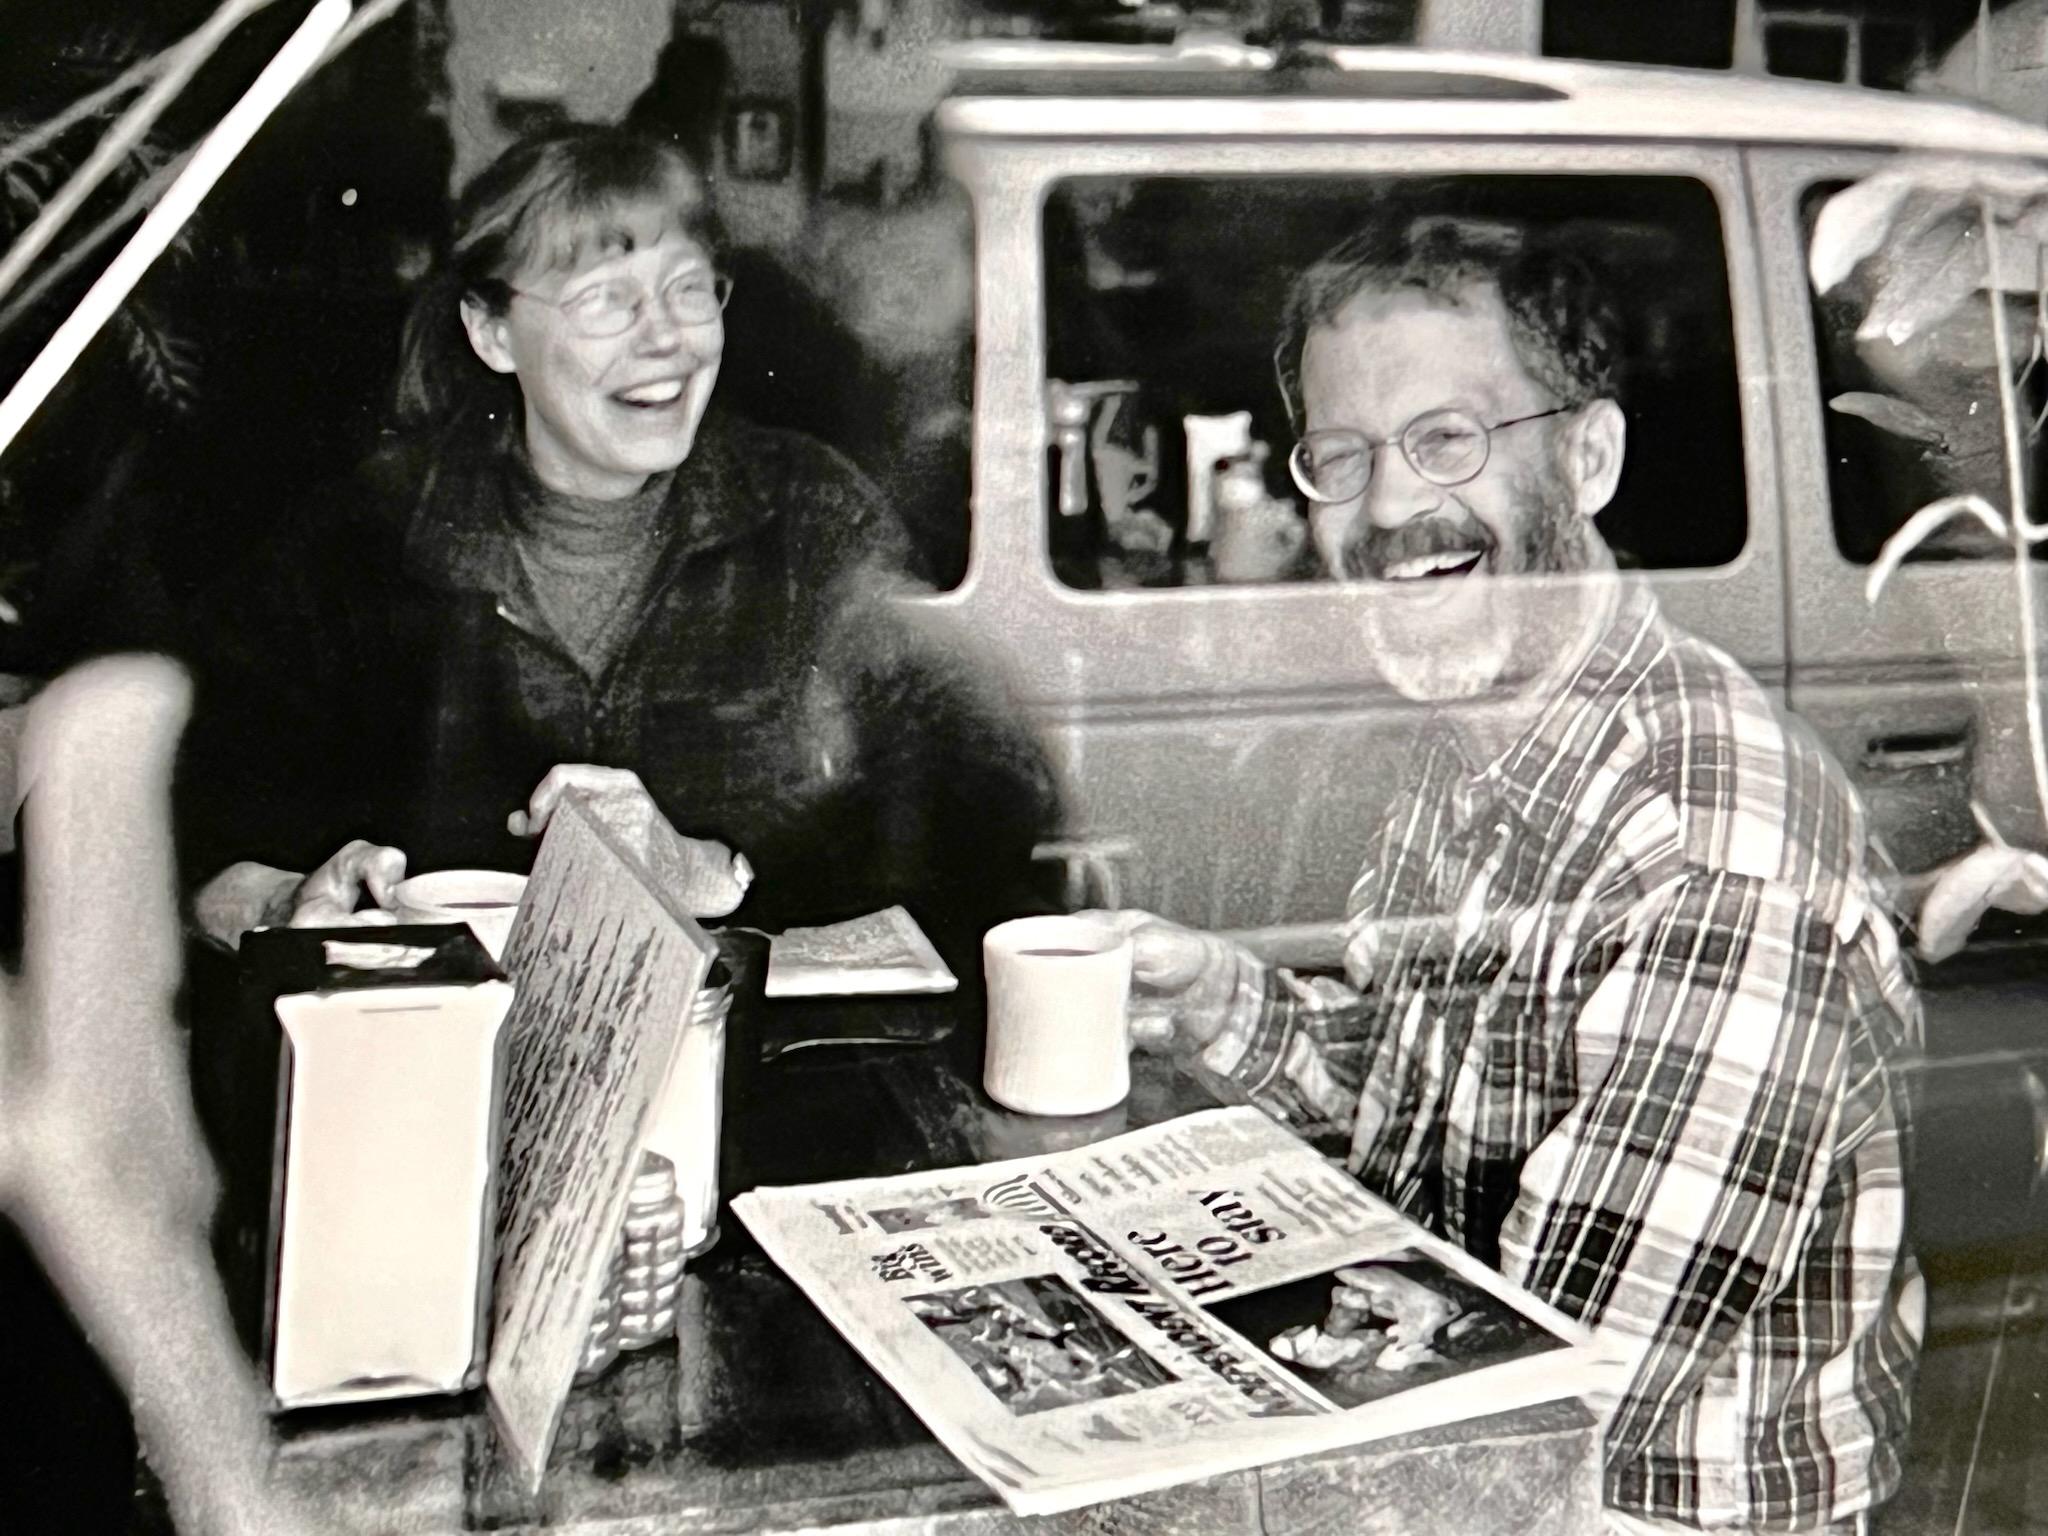 Photo by Jerry Cooper of Jan Novy and Paul Cartwright at the No Sweat Cafe´(circa 2000) 